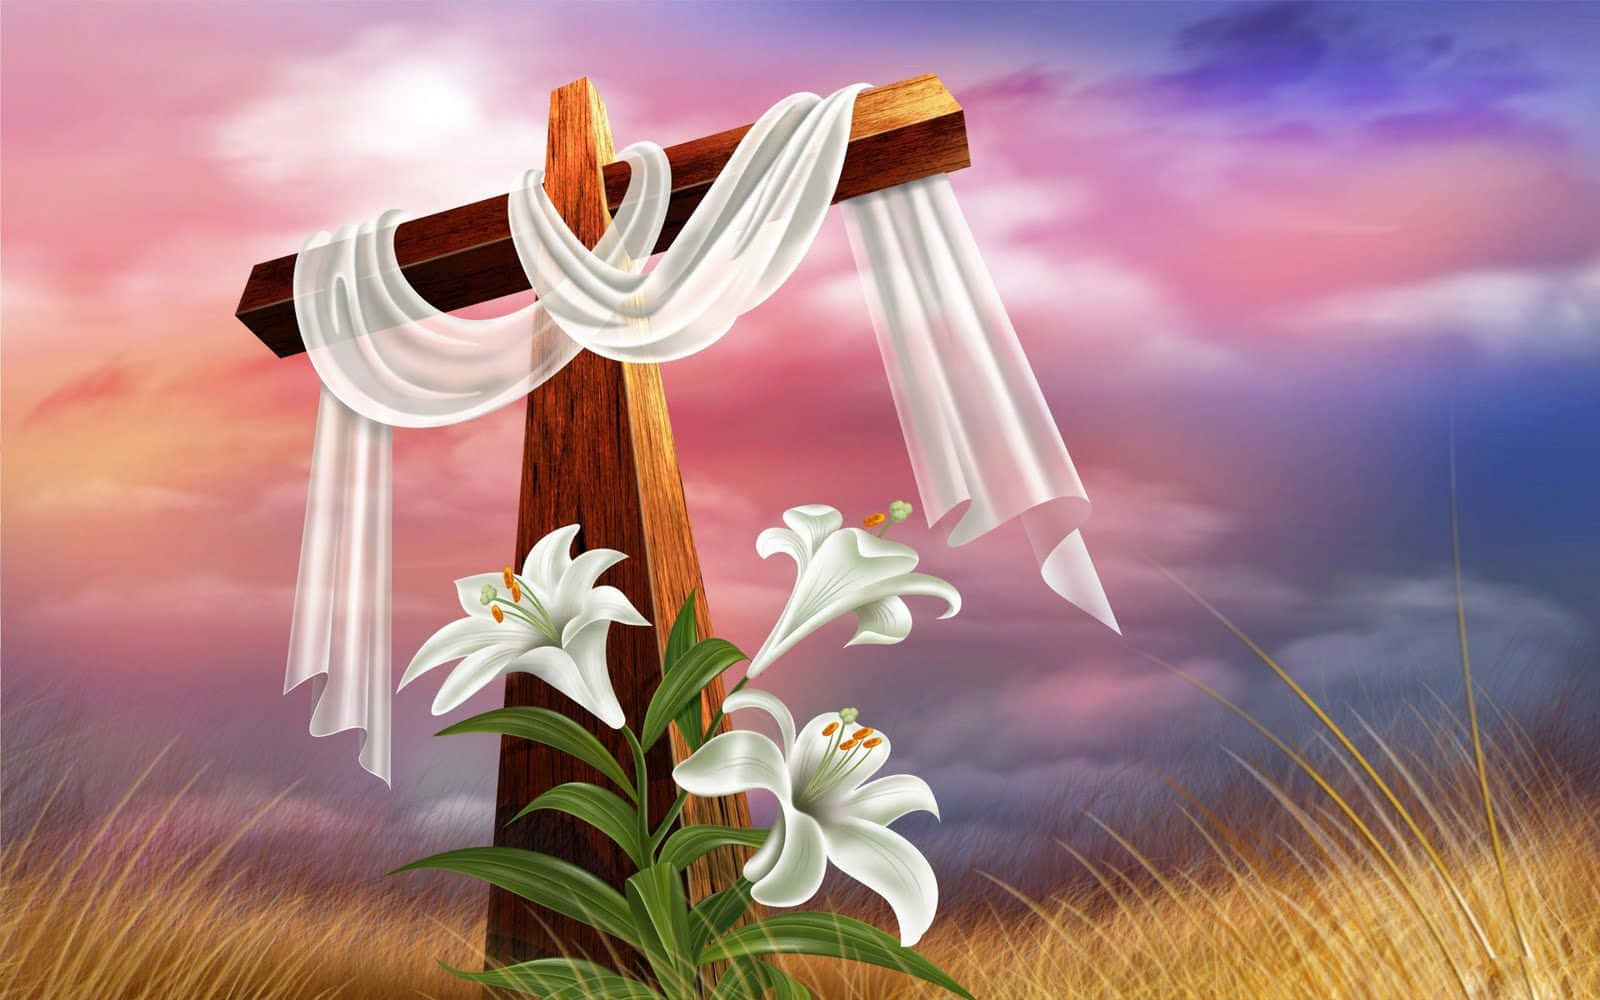 Easter Beautiful Cross With Lily Flowers Digital Art Wallpaper